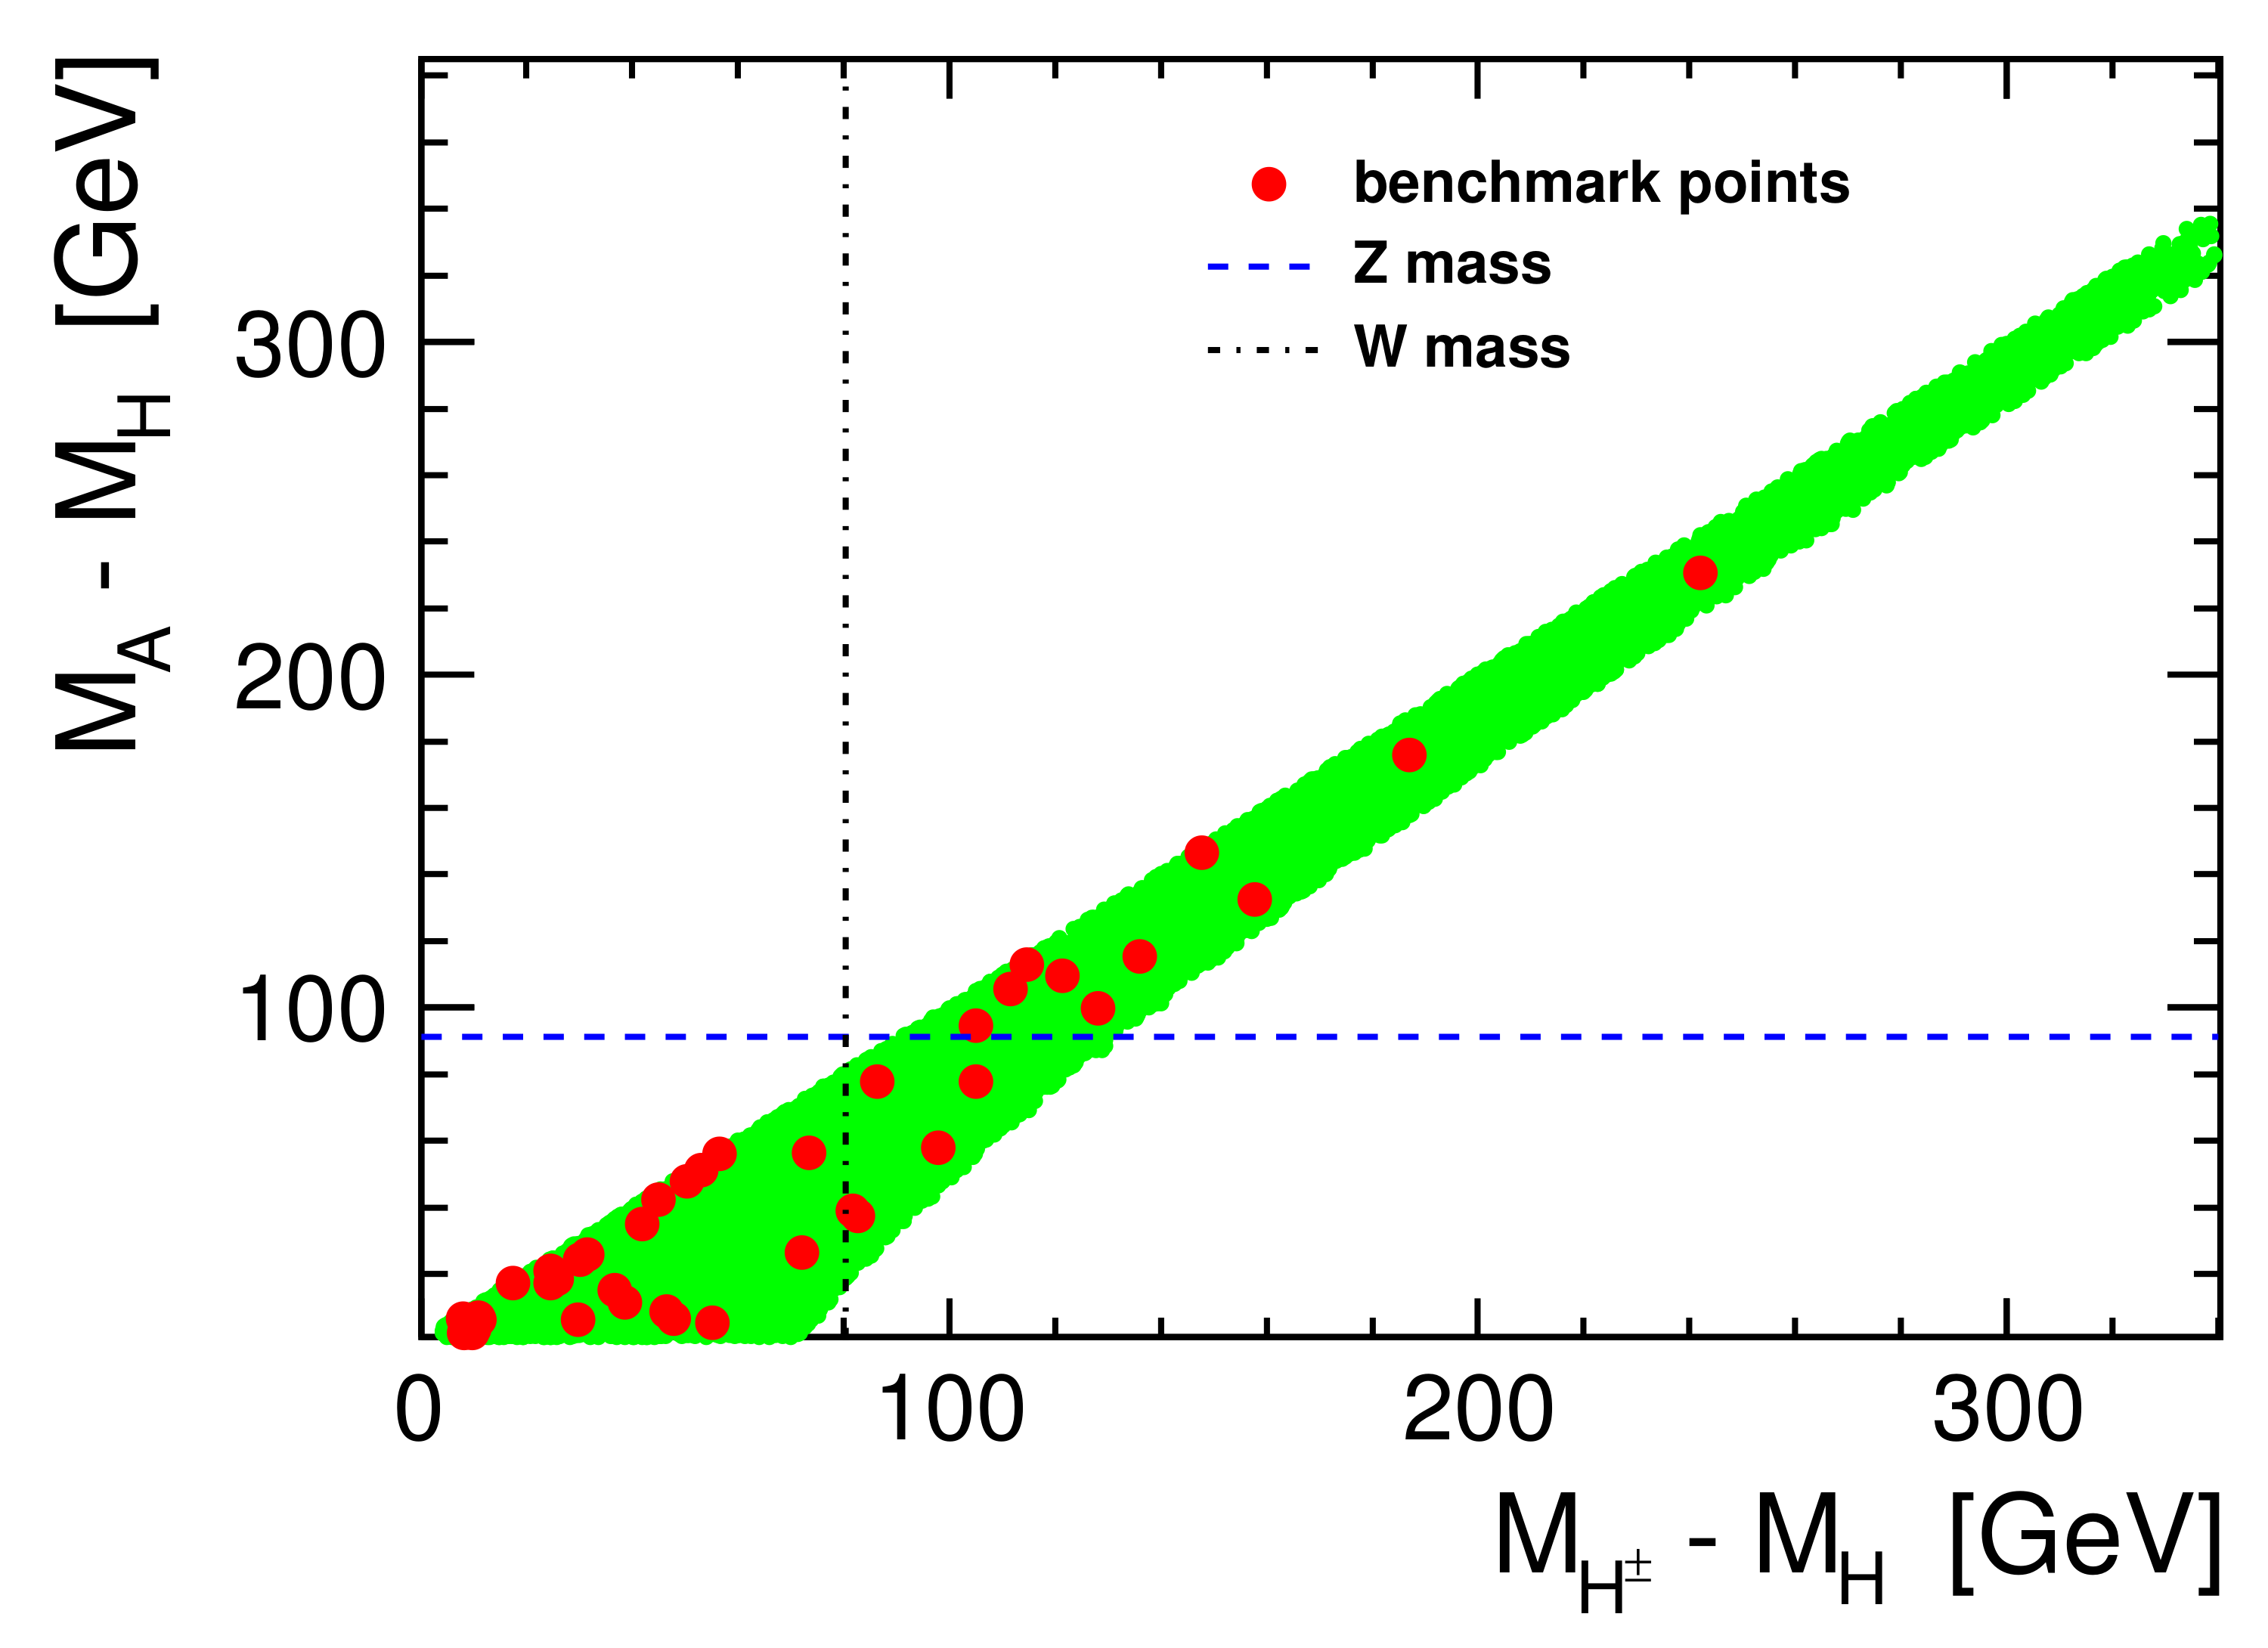 Symmetry | Free Full-Text | IDM Benchmarks for the LHC and Future Colliders